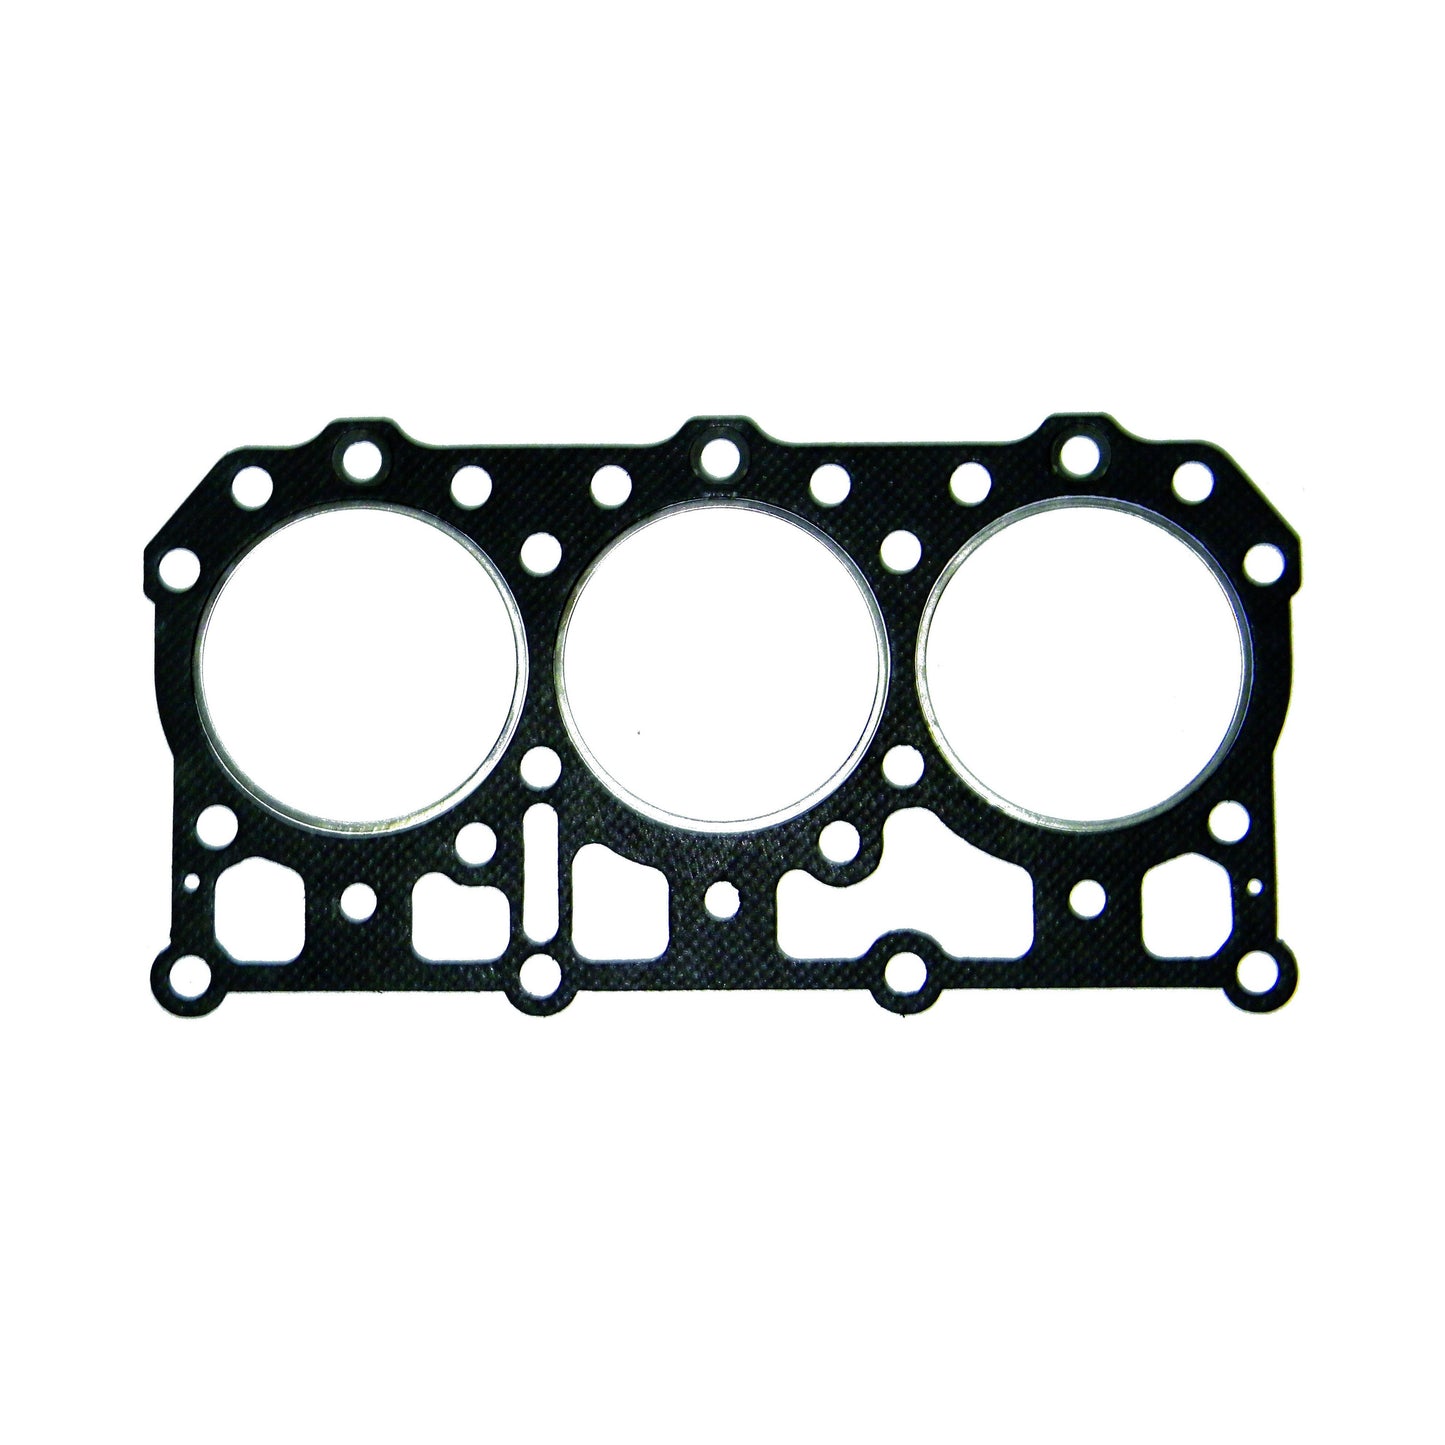 Cylinder Head Gasket For Mack Engine E7 PLN Series - Replaces 57GC2115A